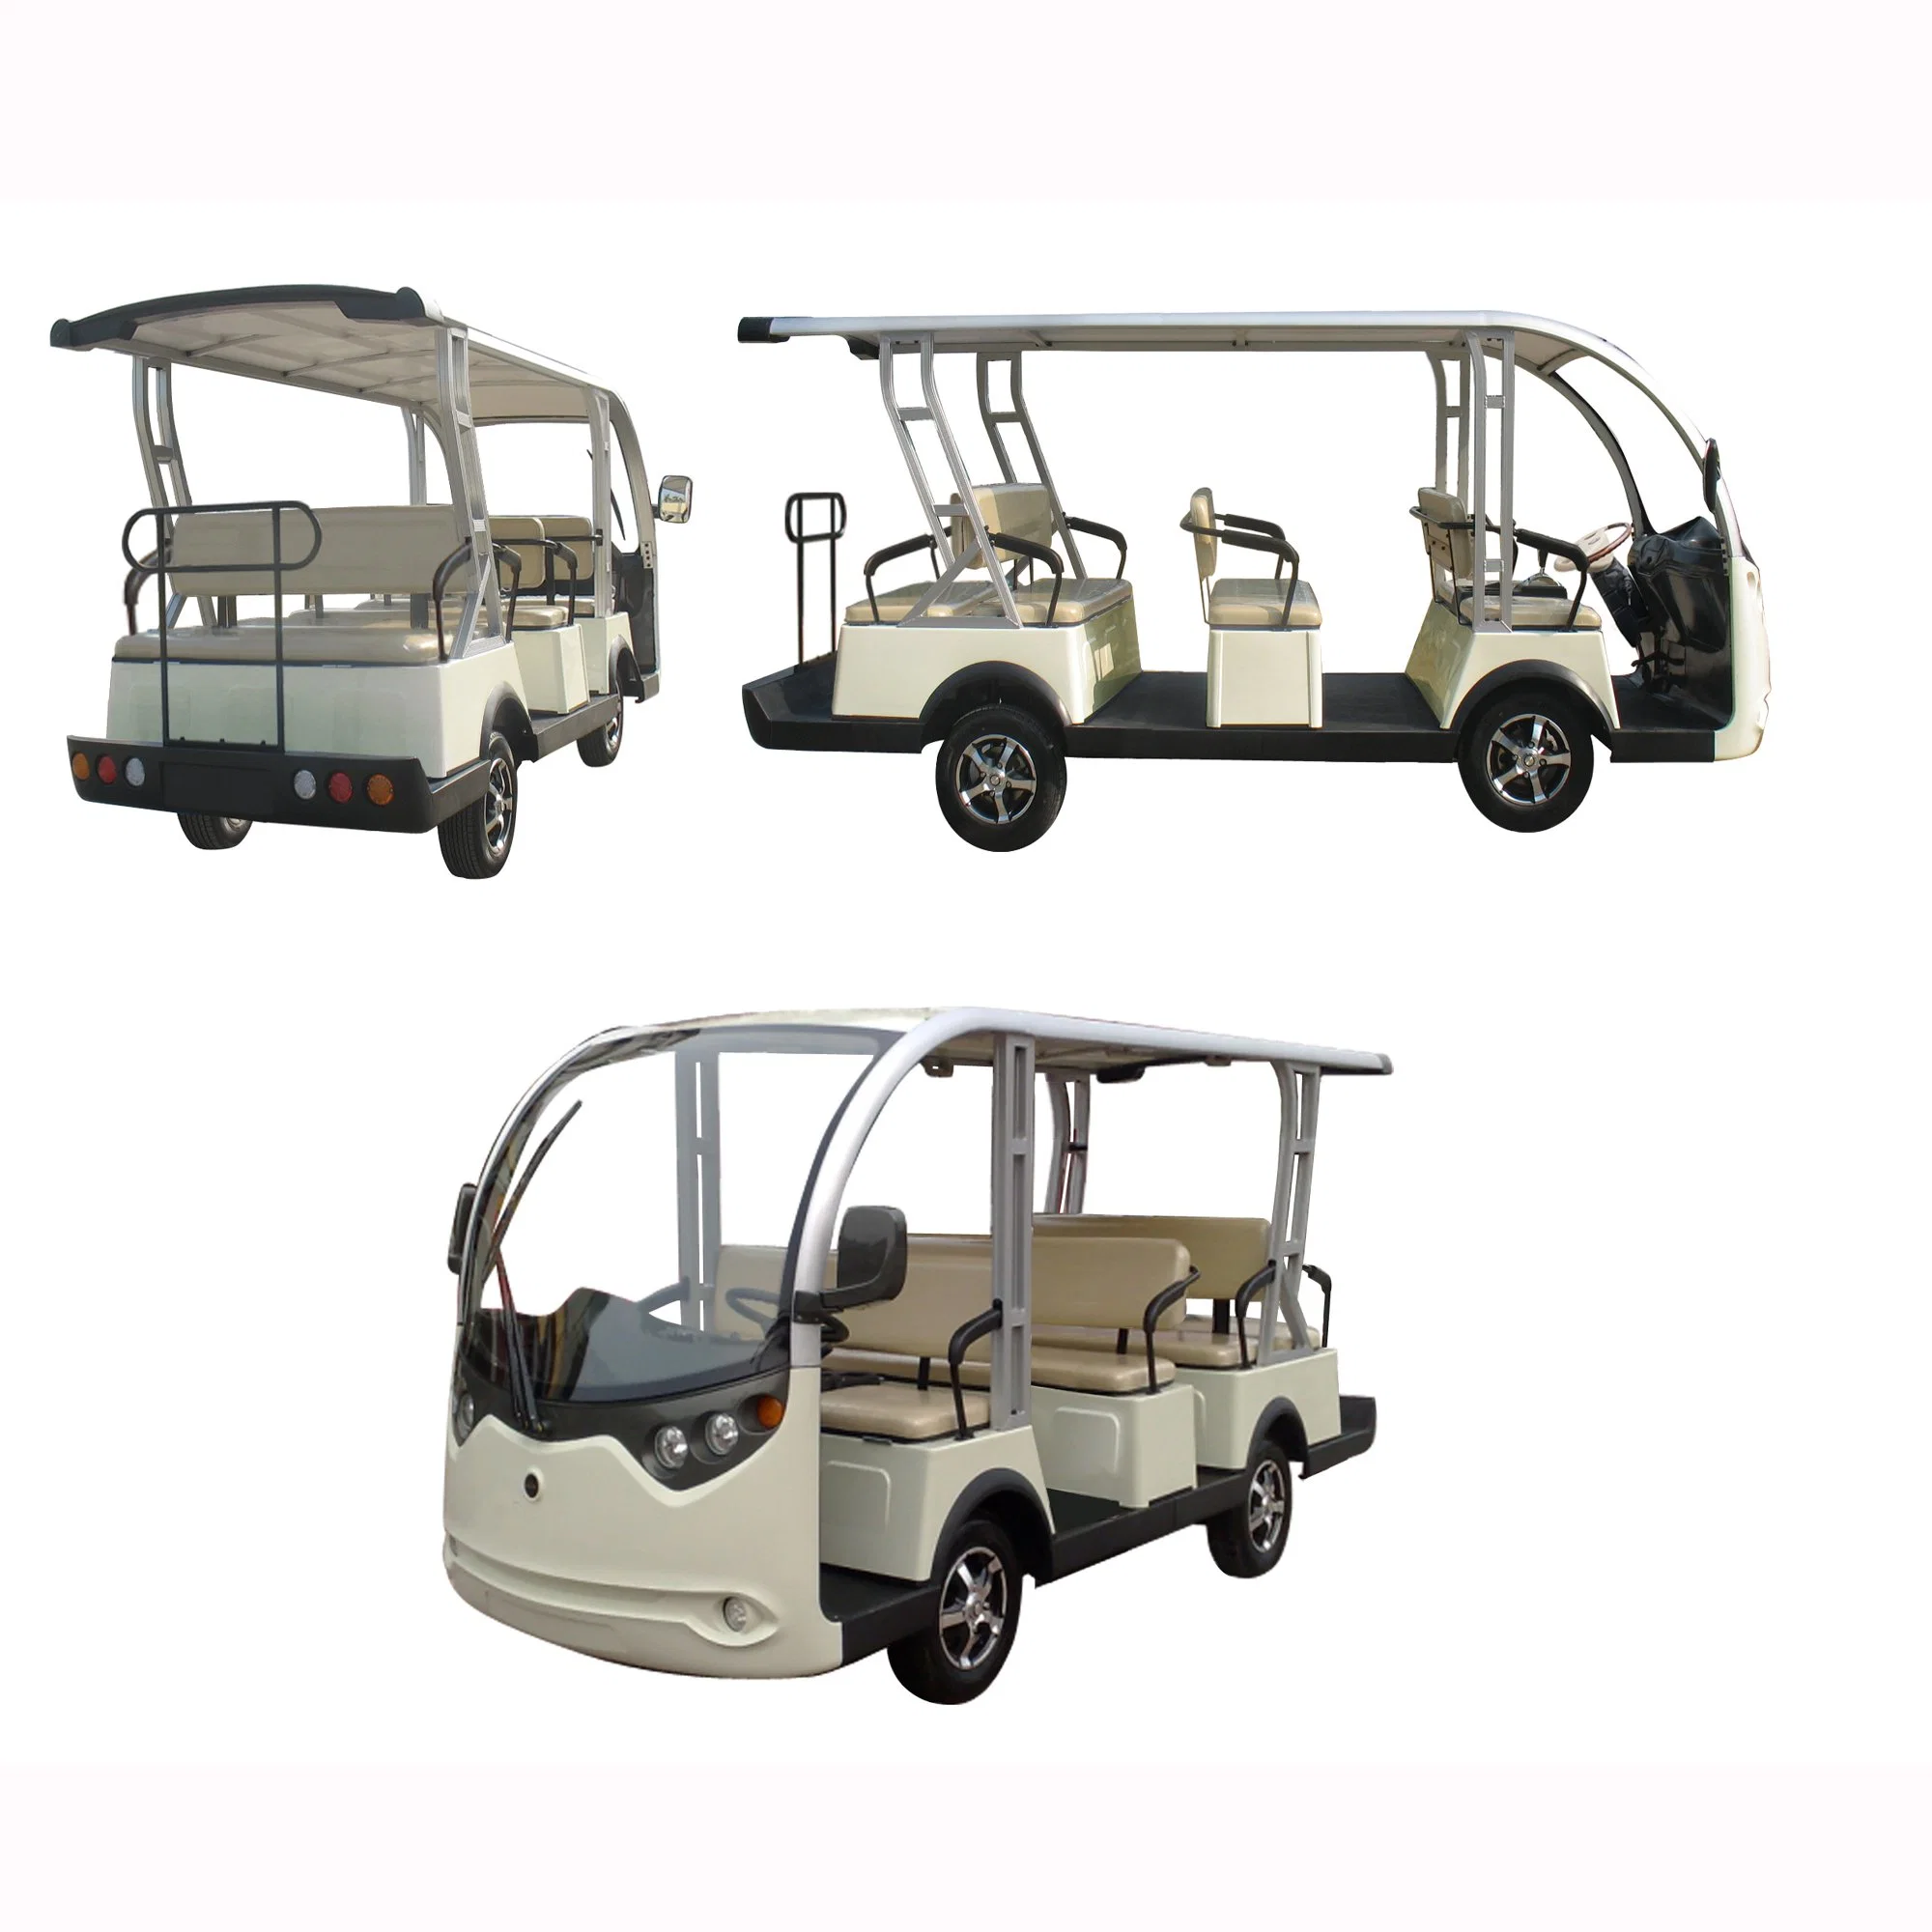 Anti-Fatigue Luxury Safety, Low Speed, Easy Handle 11 Passengers Tourist Shuttle Vehicle (Lt-S8+3)